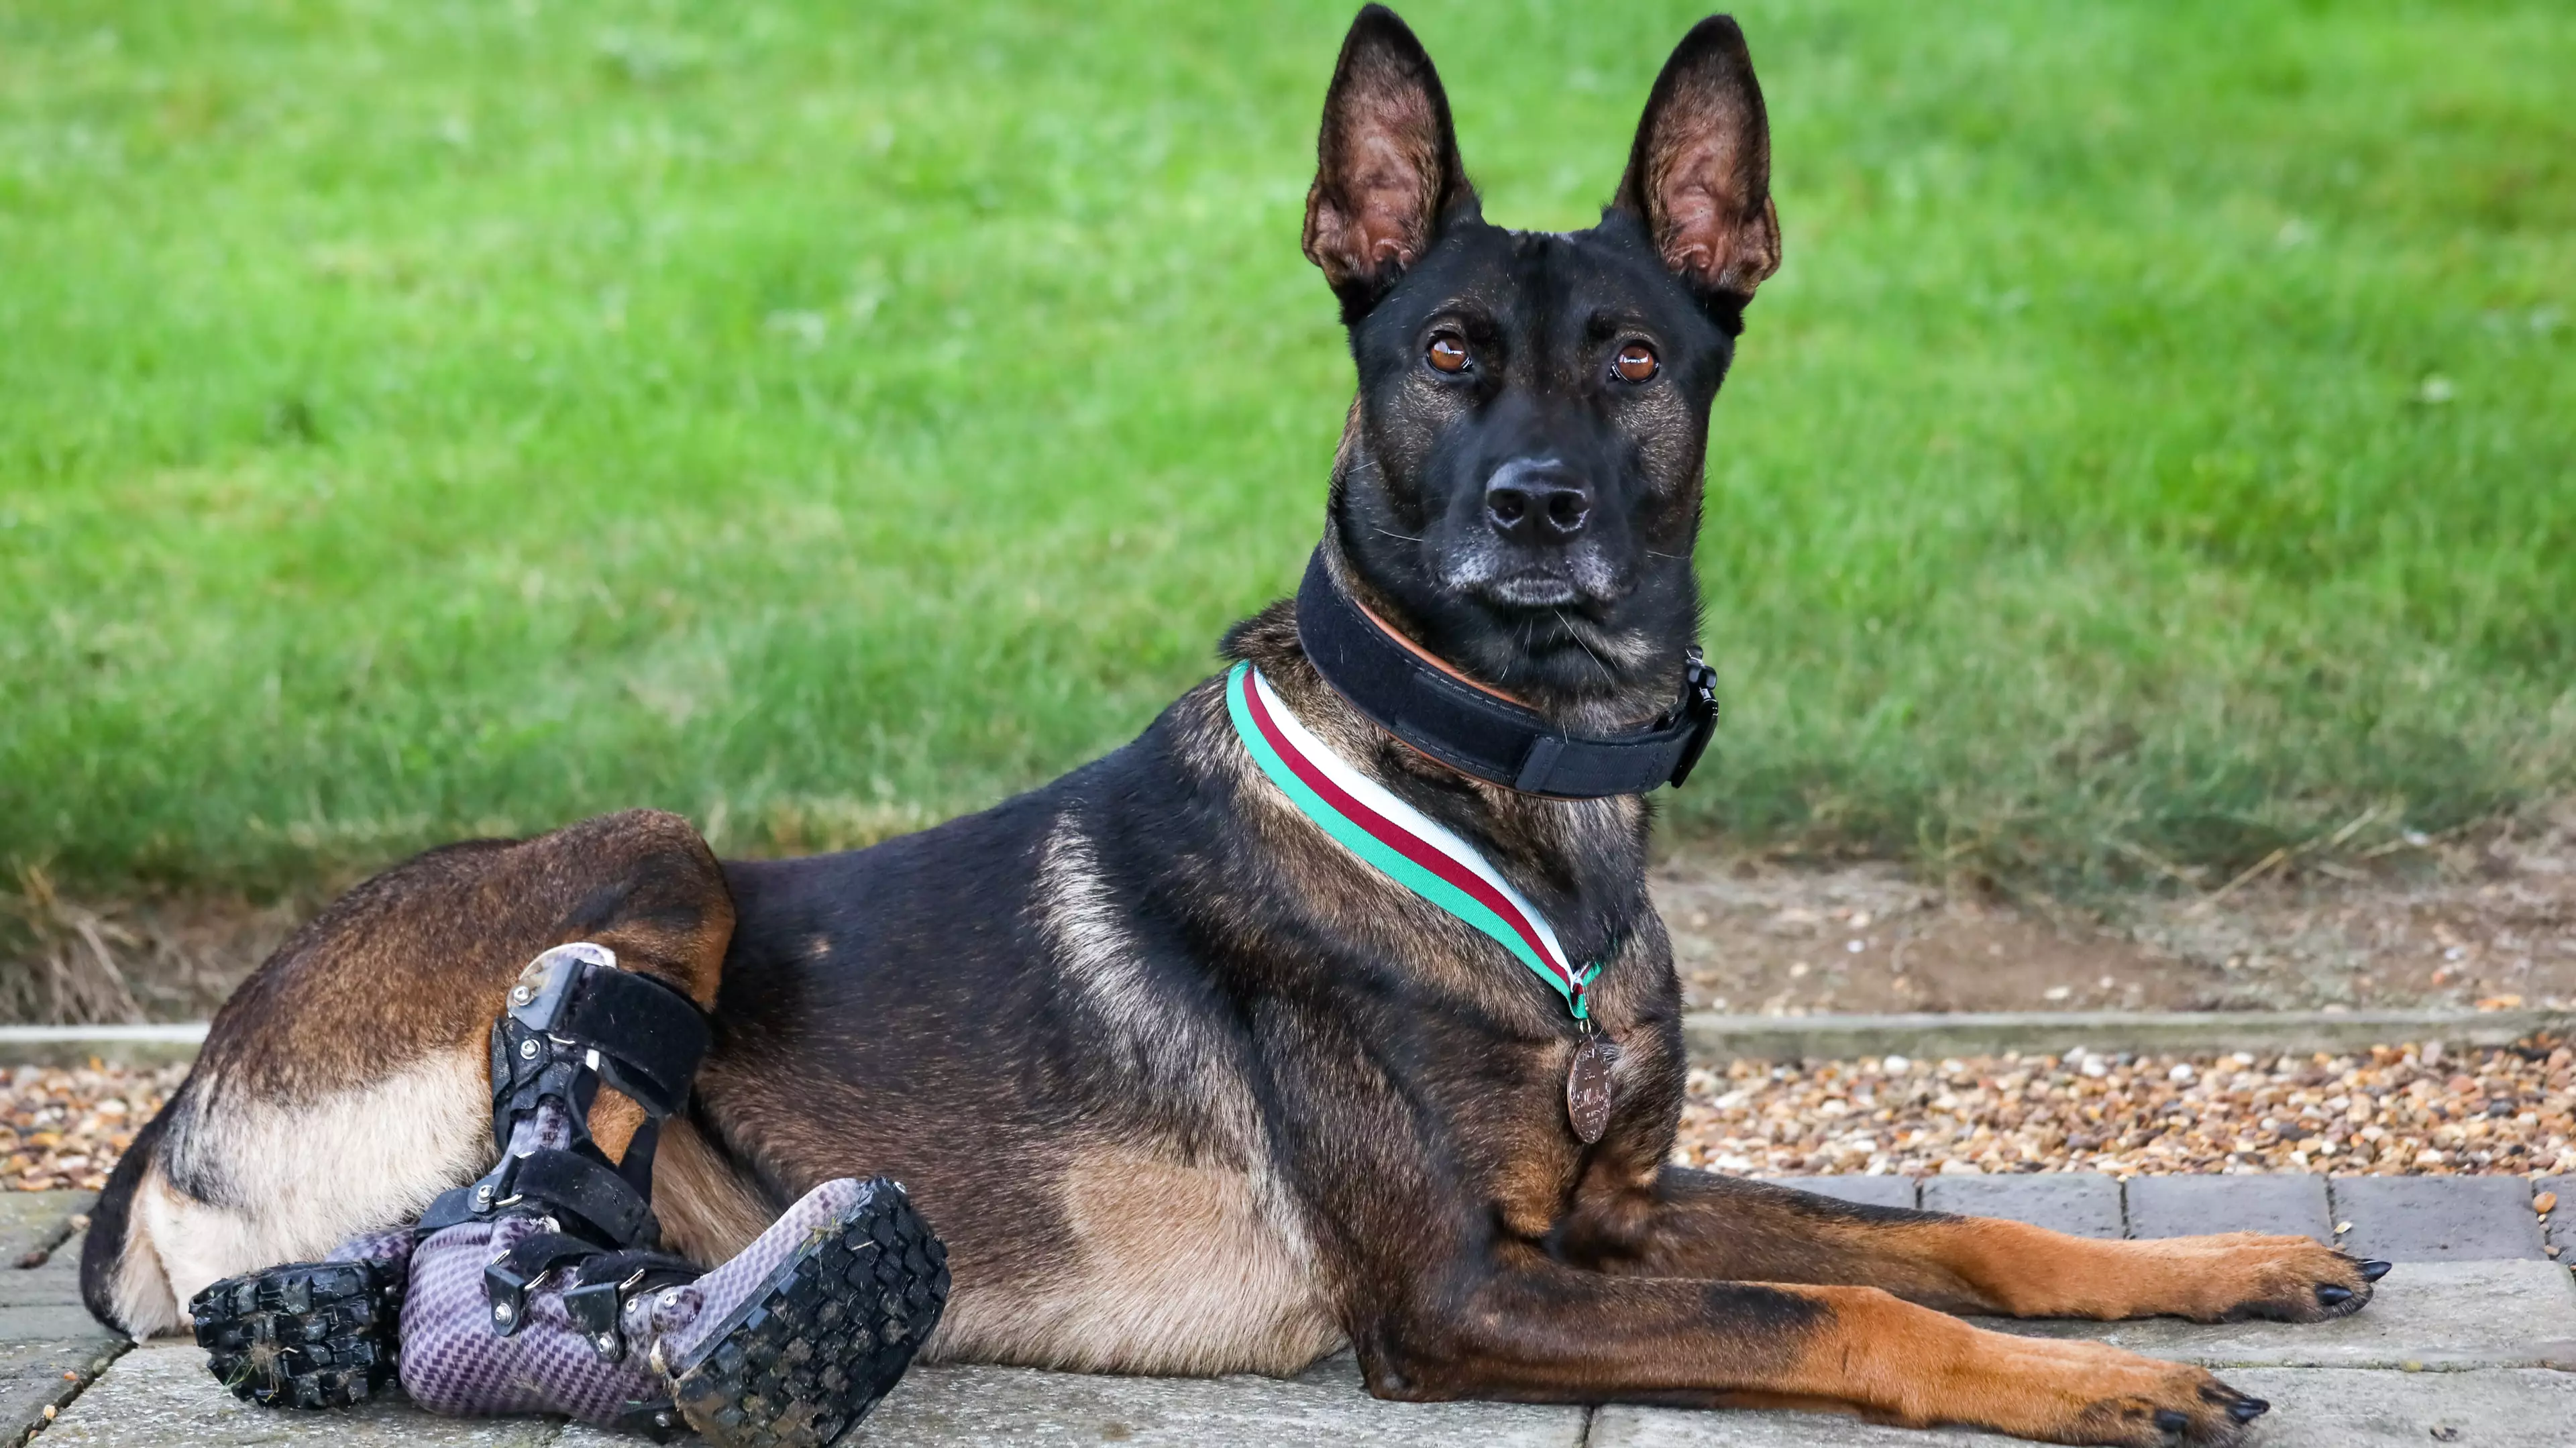 Hero Military Dog Who Suffered Life-Changing Injuries Handed Bravery Award